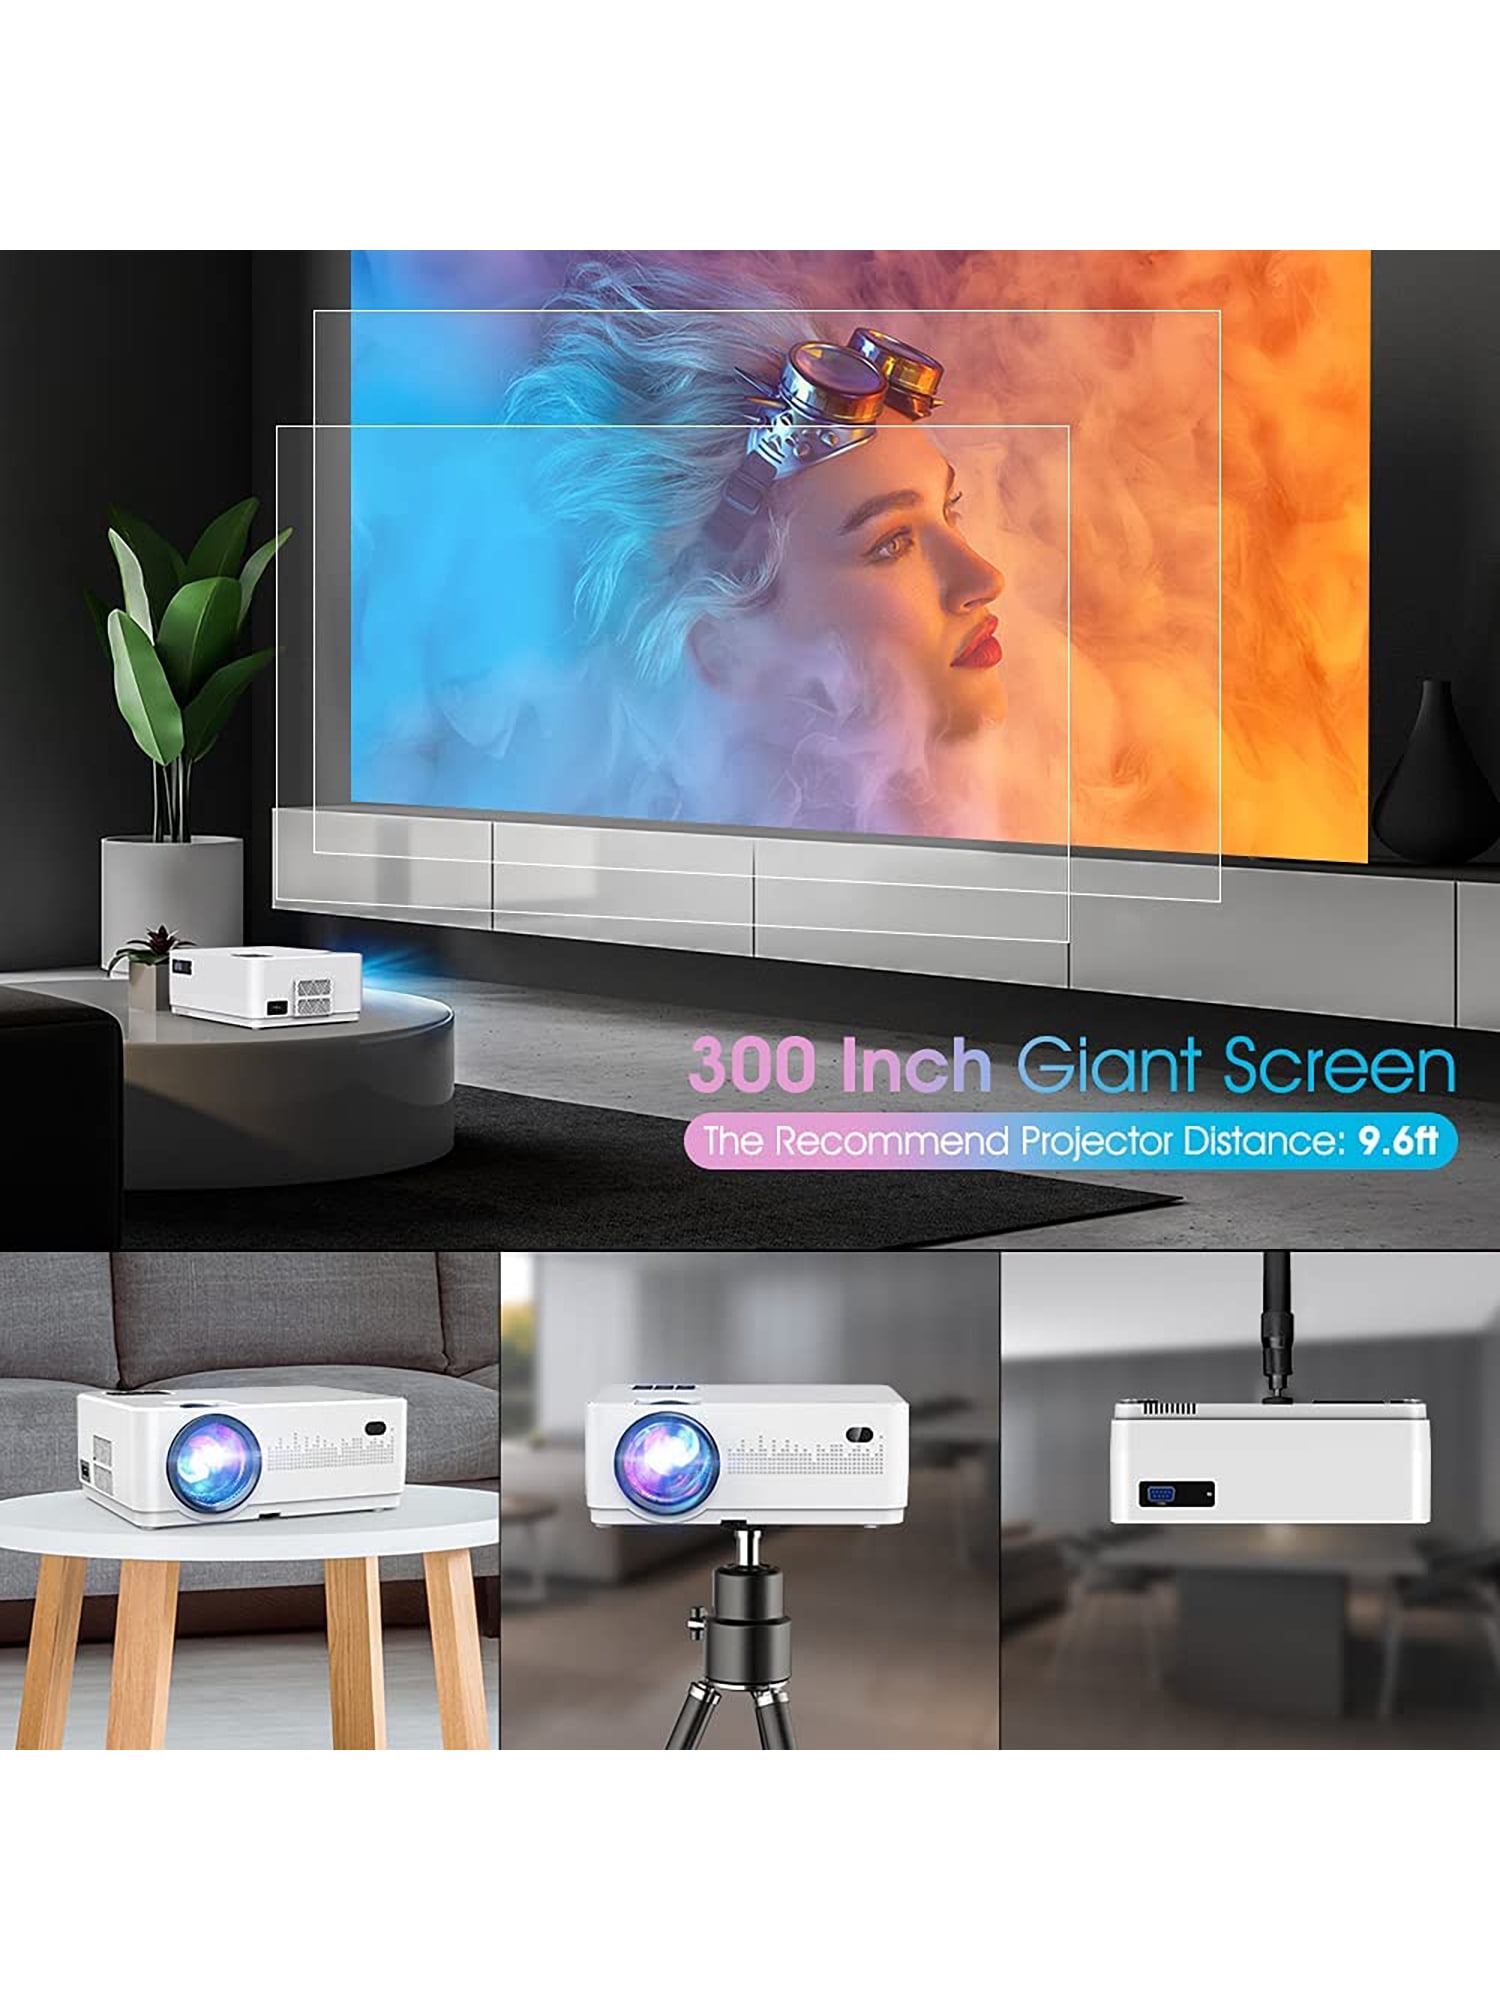 DBPOWER L23 1080P Video Projector - White